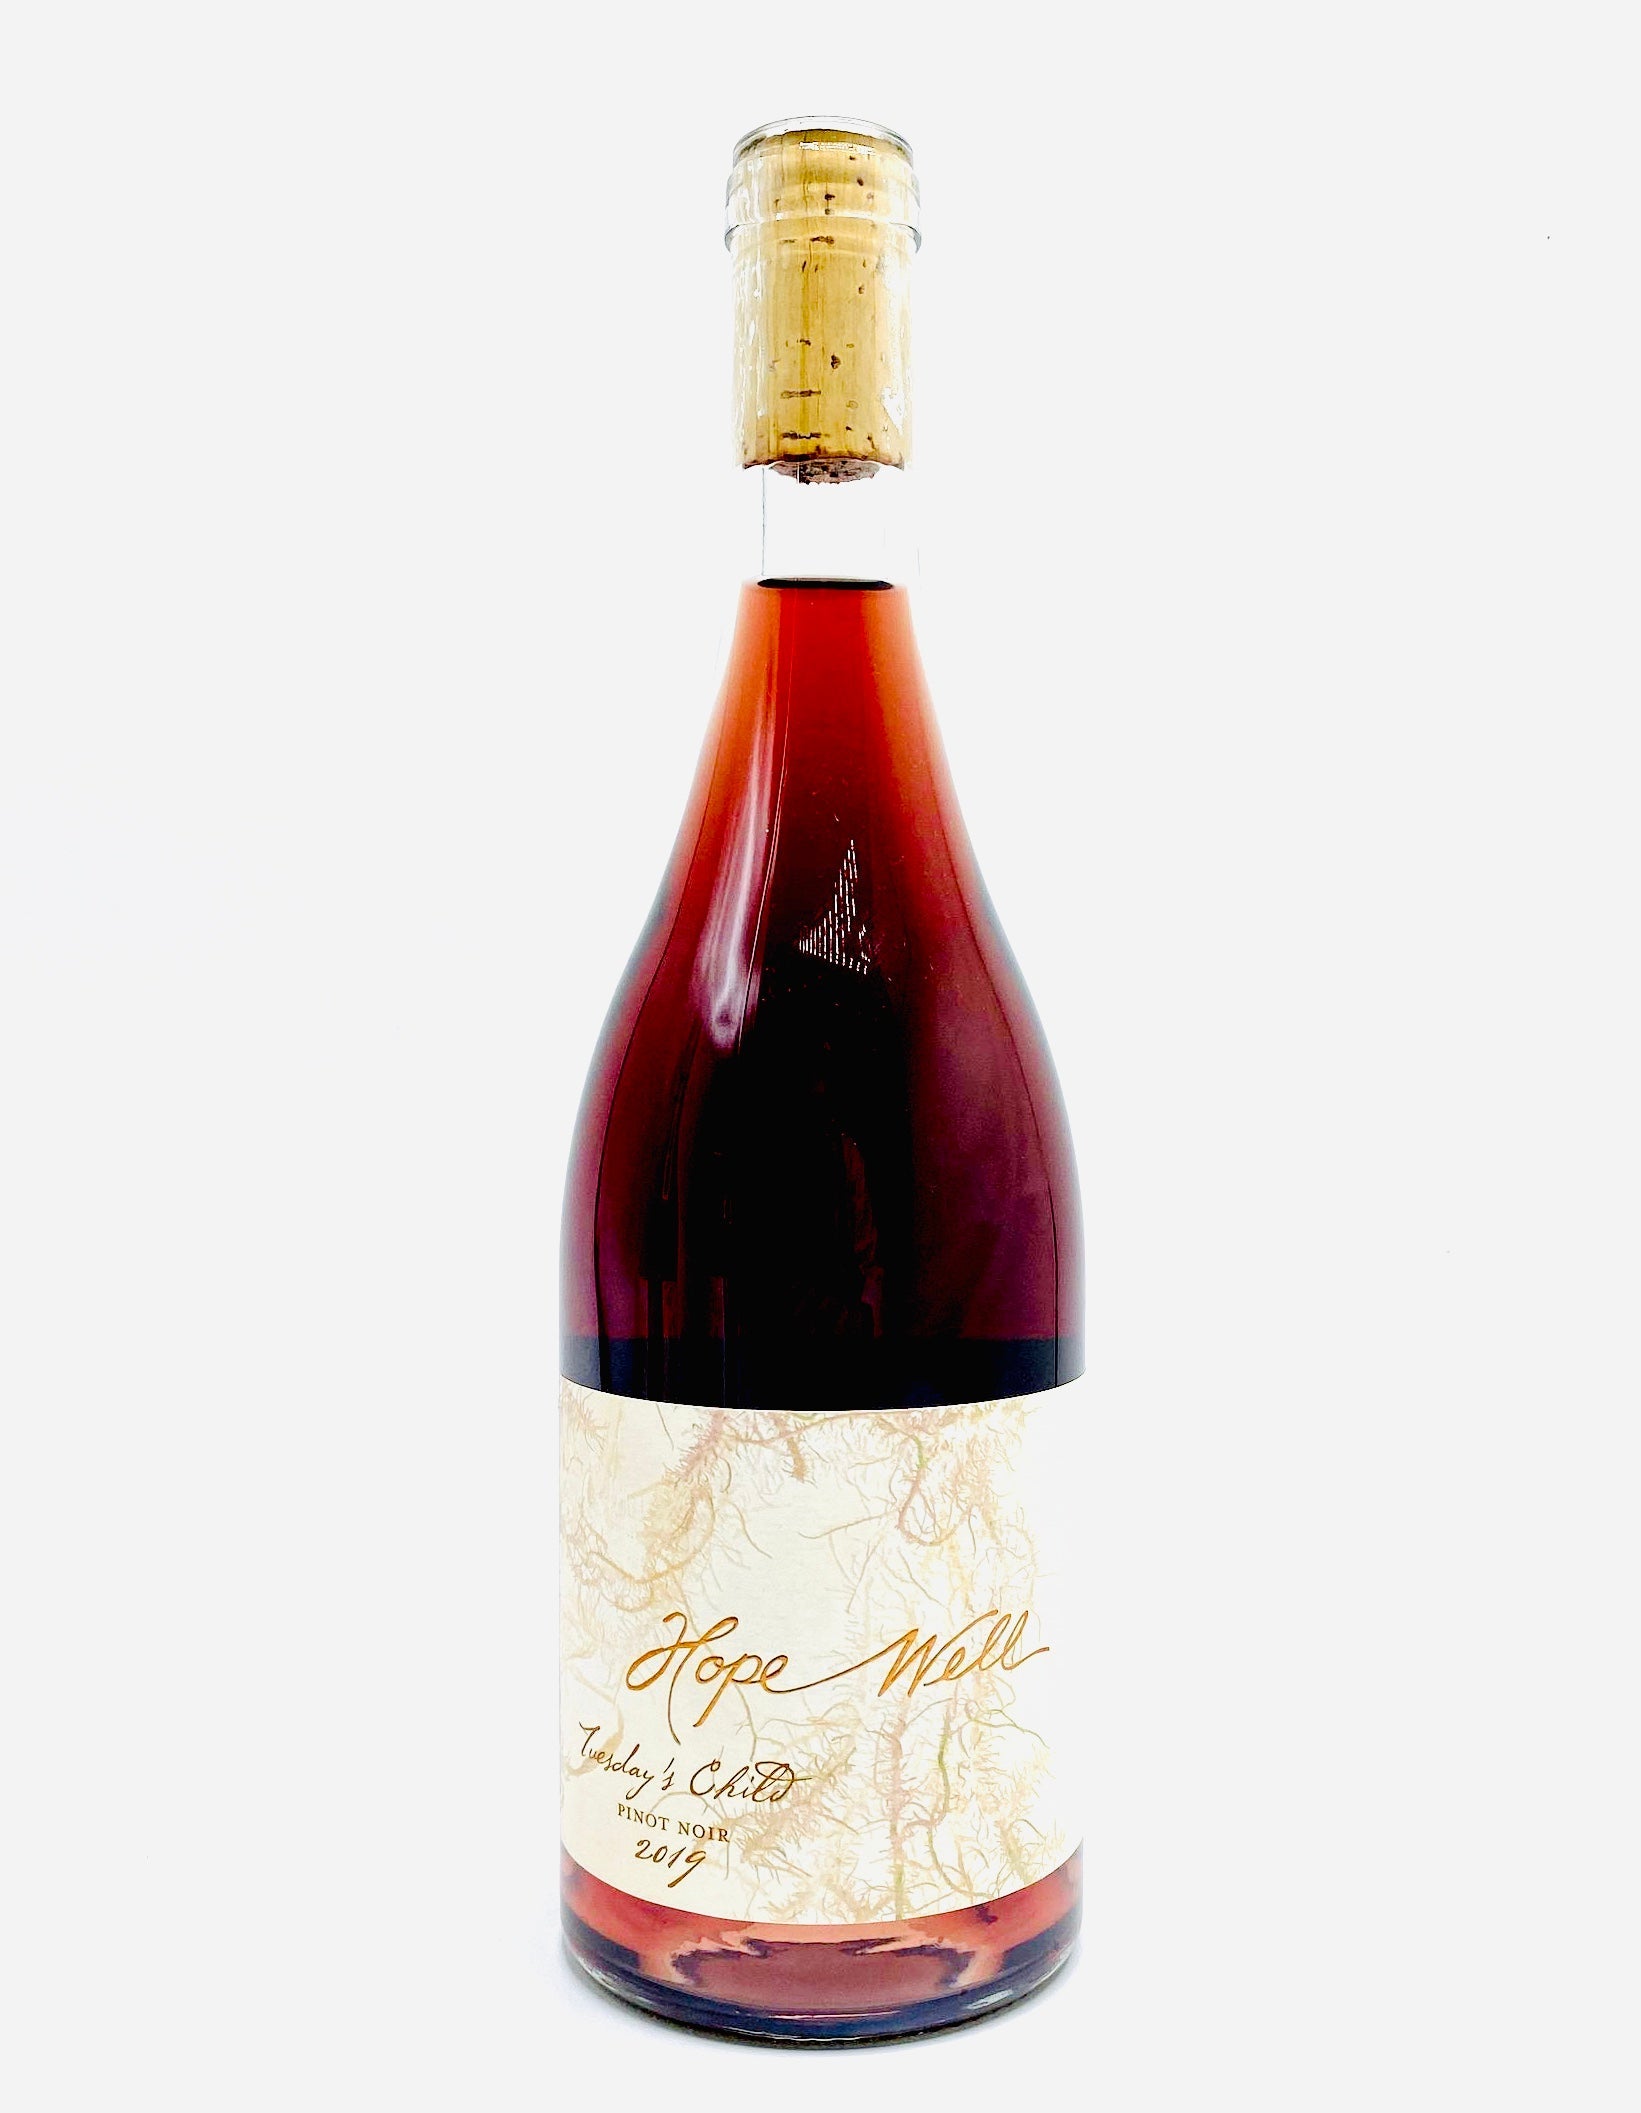 Hope Well "Tuesday's Child" Pinot Noir 2019 (13.5% ABV) 750ml